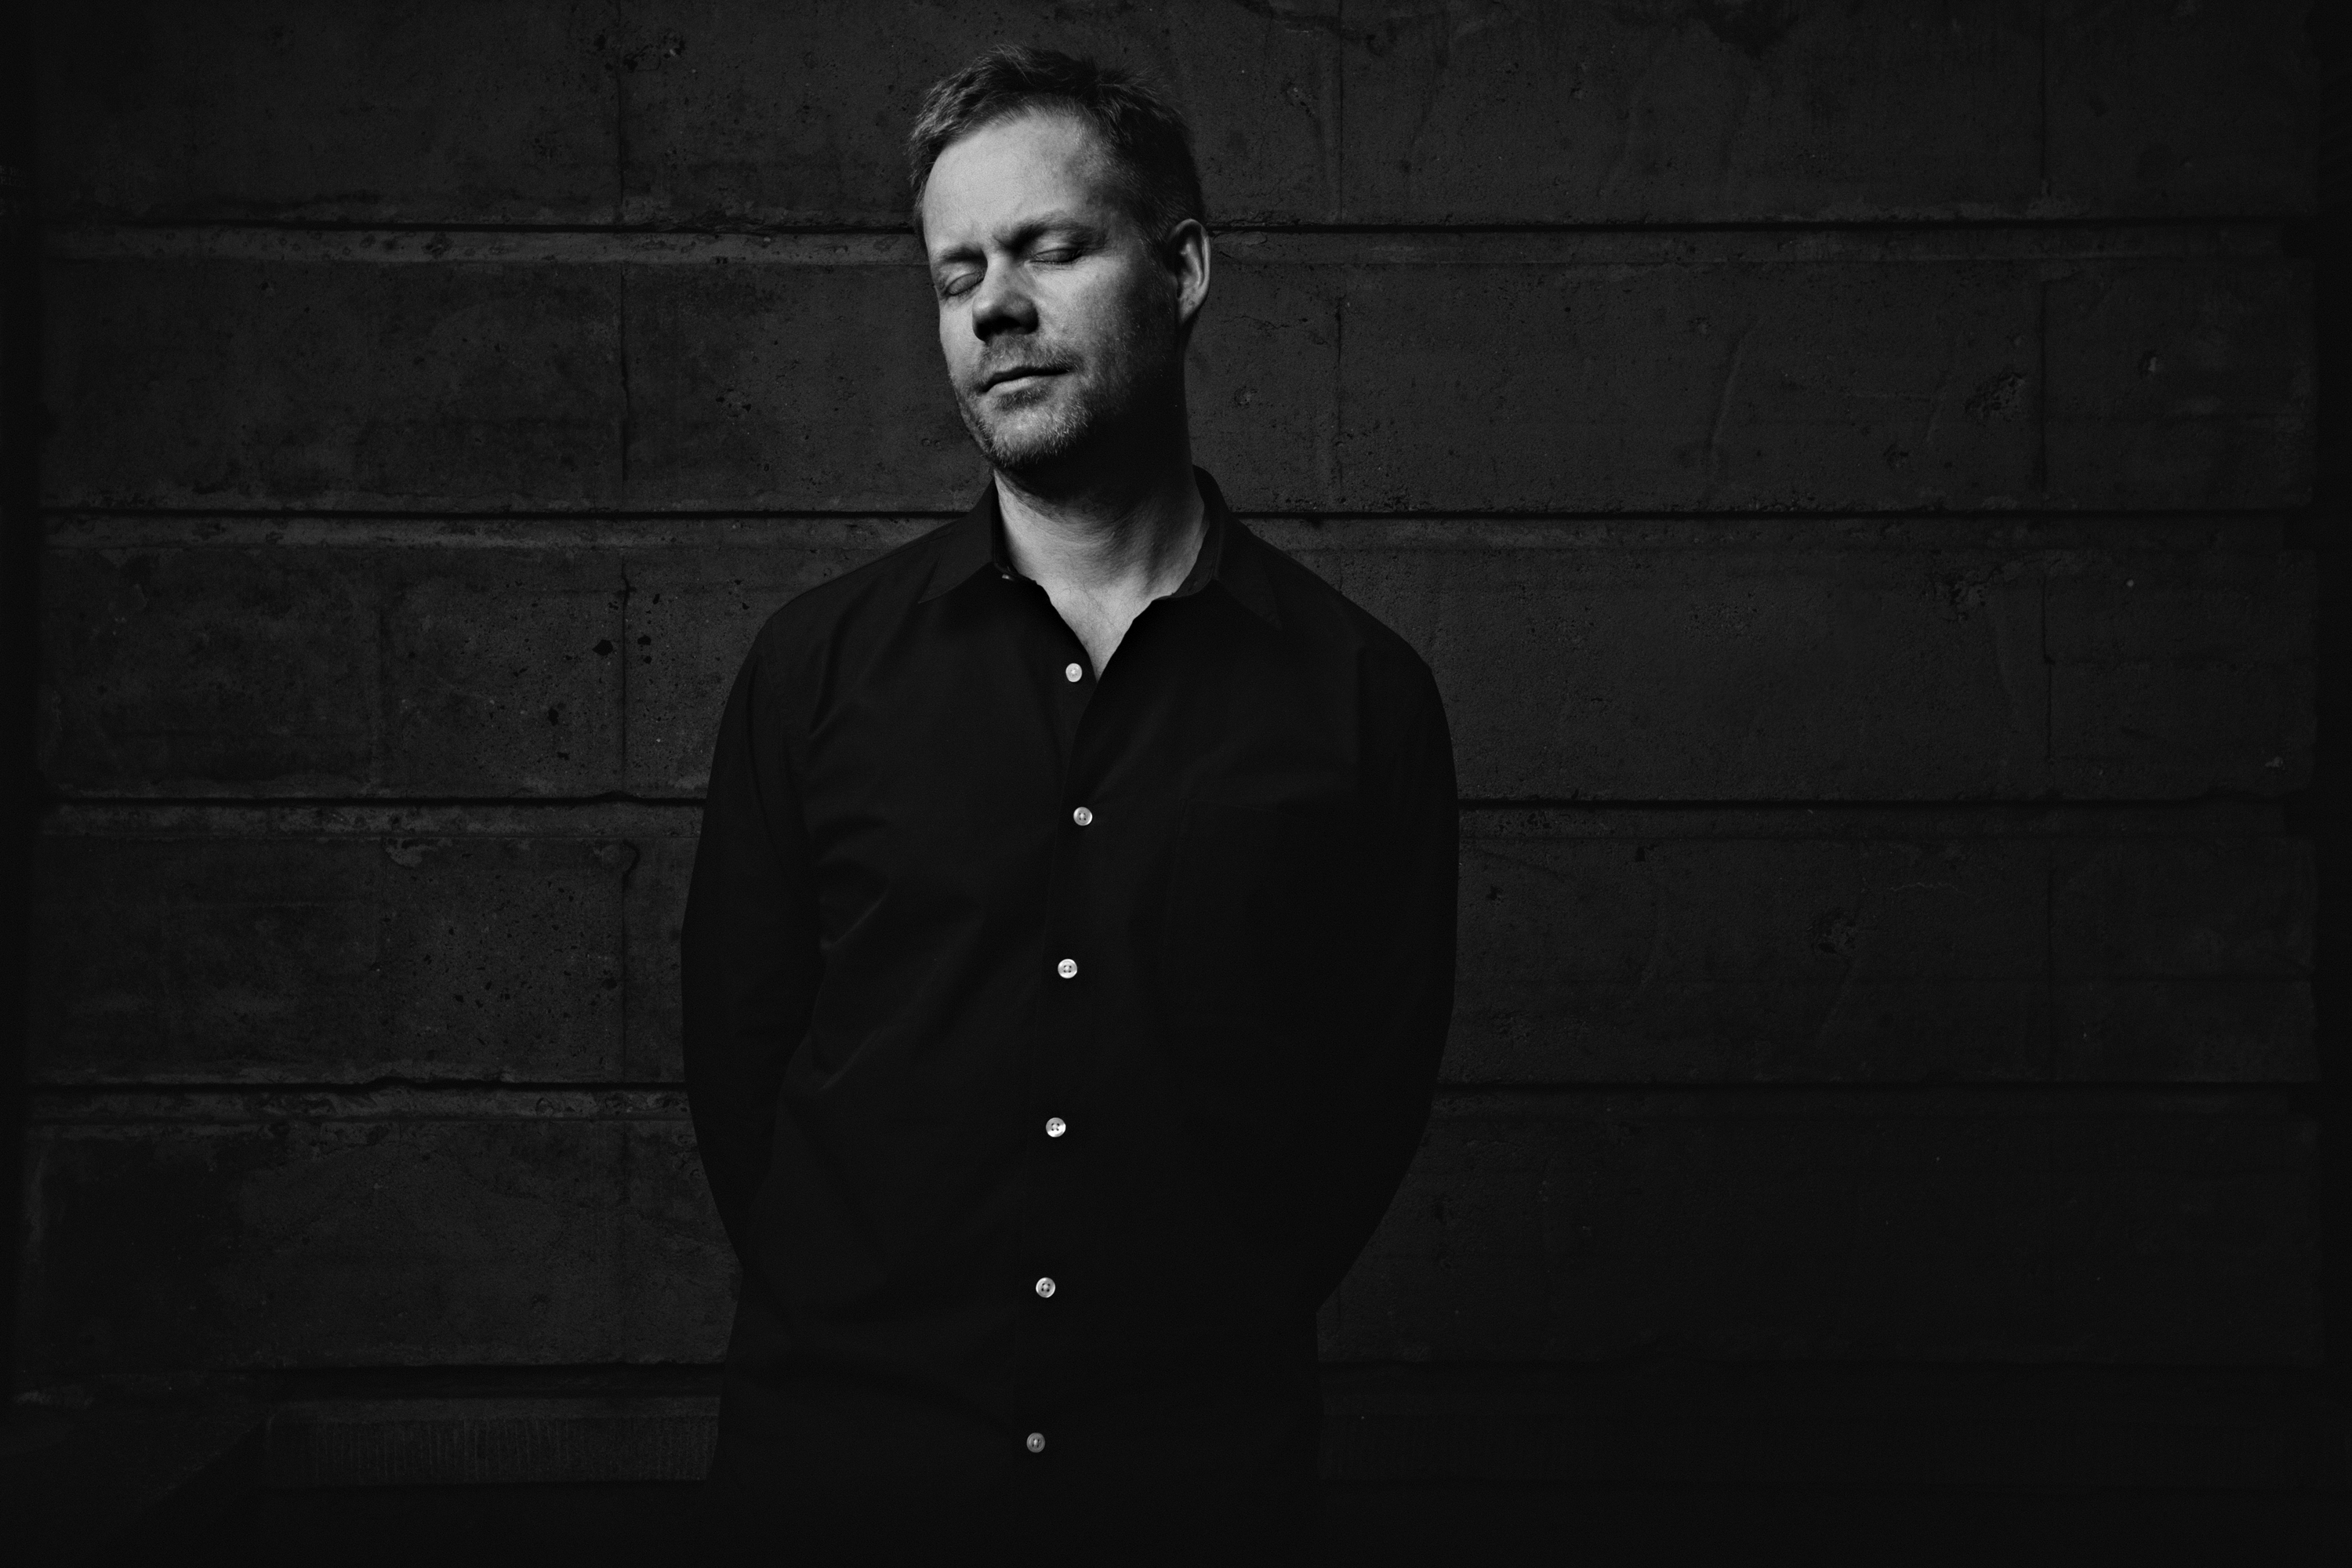 Max Richter has composed an 8-hour album devoted entirely to sleep. (Mike Terry)